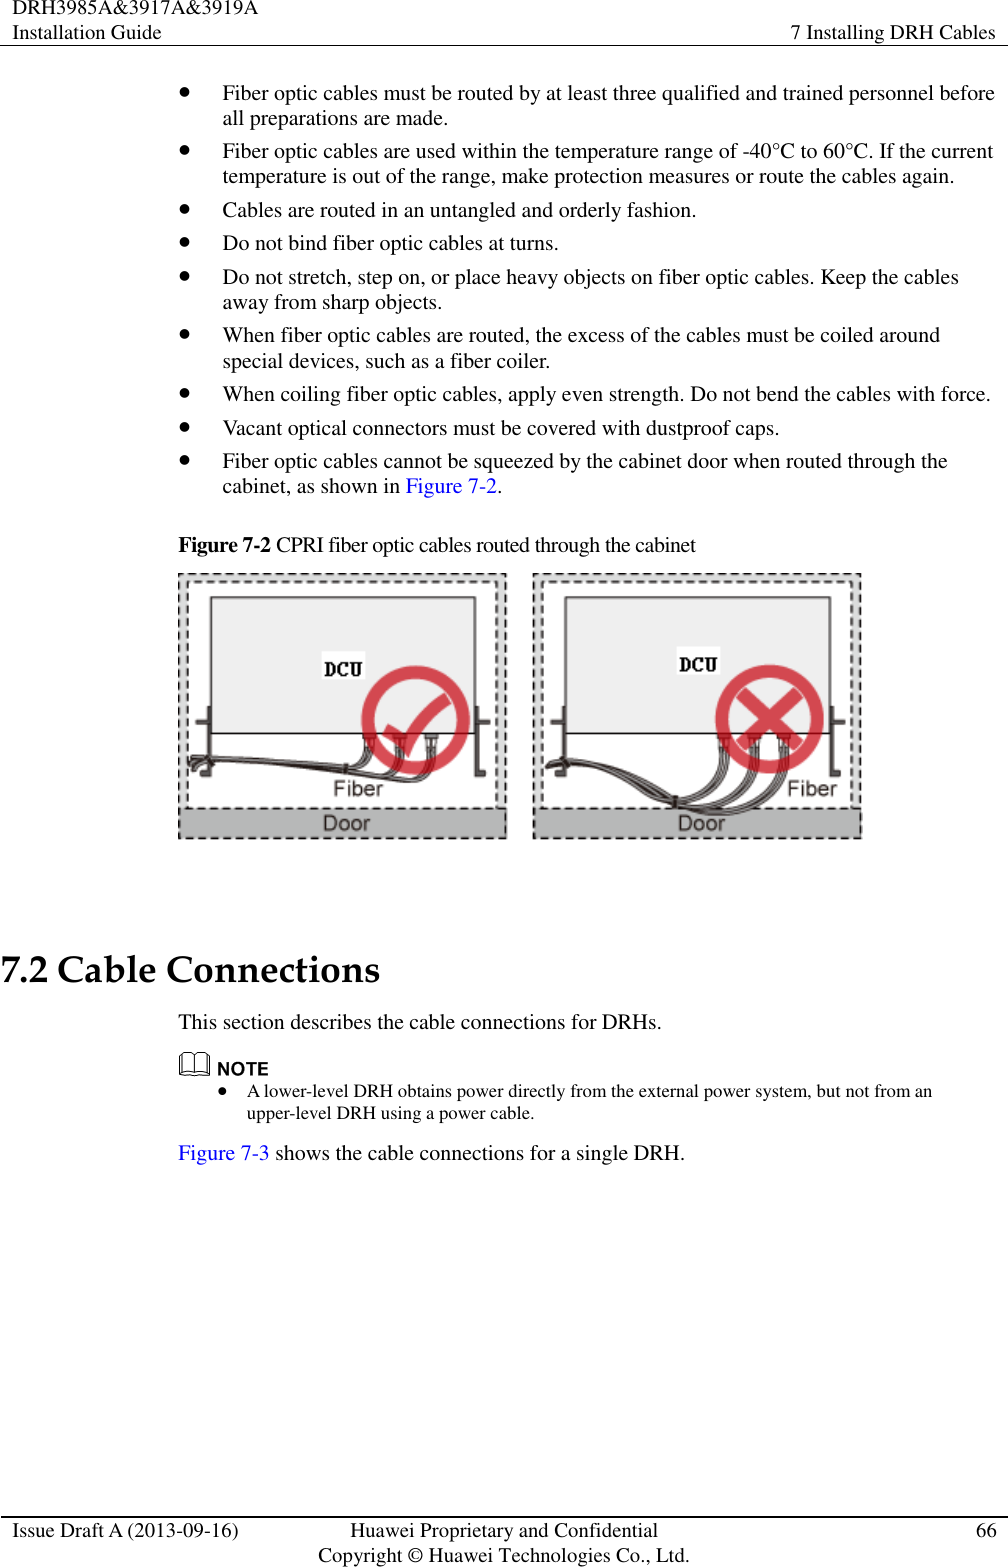 DRH3985A&amp;3917A&amp;3919A Installation Guide 7 Installing DRH Cables  Issue Draft A (2013-09-16) Huawei Proprietary and Confidential                                     Copyright © Huawei Technologies Co., Ltd. 66   Fiber optic cables must be routed by at least three qualified and trained personnel before all preparations are made.  Fiber optic cables are used within the temperature range of -40°C to 60°C. If the current temperature is out of the range, make protection measures or route the cables again.  Cables are routed in an untangled and orderly fashion.  Do not bind fiber optic cables at turns.  Do not stretch, step on, or place heavy objects on fiber optic cables. Keep the cables away from sharp objects.  When fiber optic cables are routed, the excess of the cables must be coiled around special devices, such as a fiber coiler.  When coiling fiber optic cables, apply even strength. Do not bend the cables with force.  Vacant optical connectors must be covered with dustproof caps.  Fiber optic cables cannot be squeezed by the cabinet door when routed through the cabinet, as shown in Figure 7-2. Figure 7-2 CPRI fiber optic cables routed through the cabinet    7.2 Cable Connections This section describes the cable connections for DRHs.   A lower-level DRH obtains power directly from the external power system, but not from an upper-level DRH using a power cable. Figure 7-3 shows the cable connections for a single DRH. 